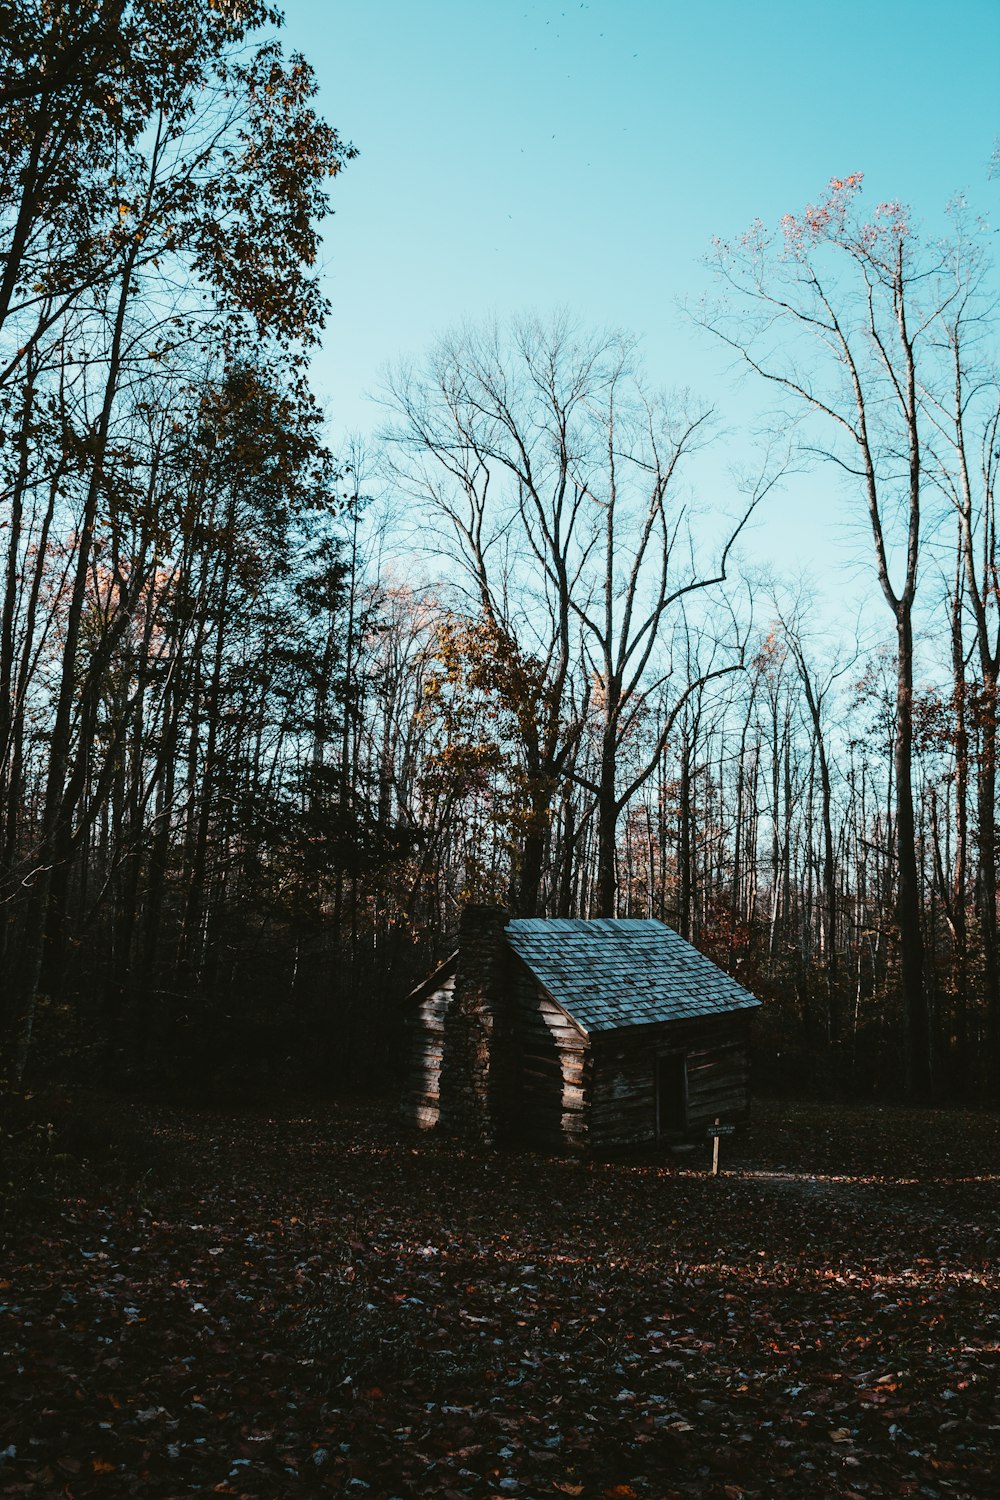 a small cabin in the middle of a forest